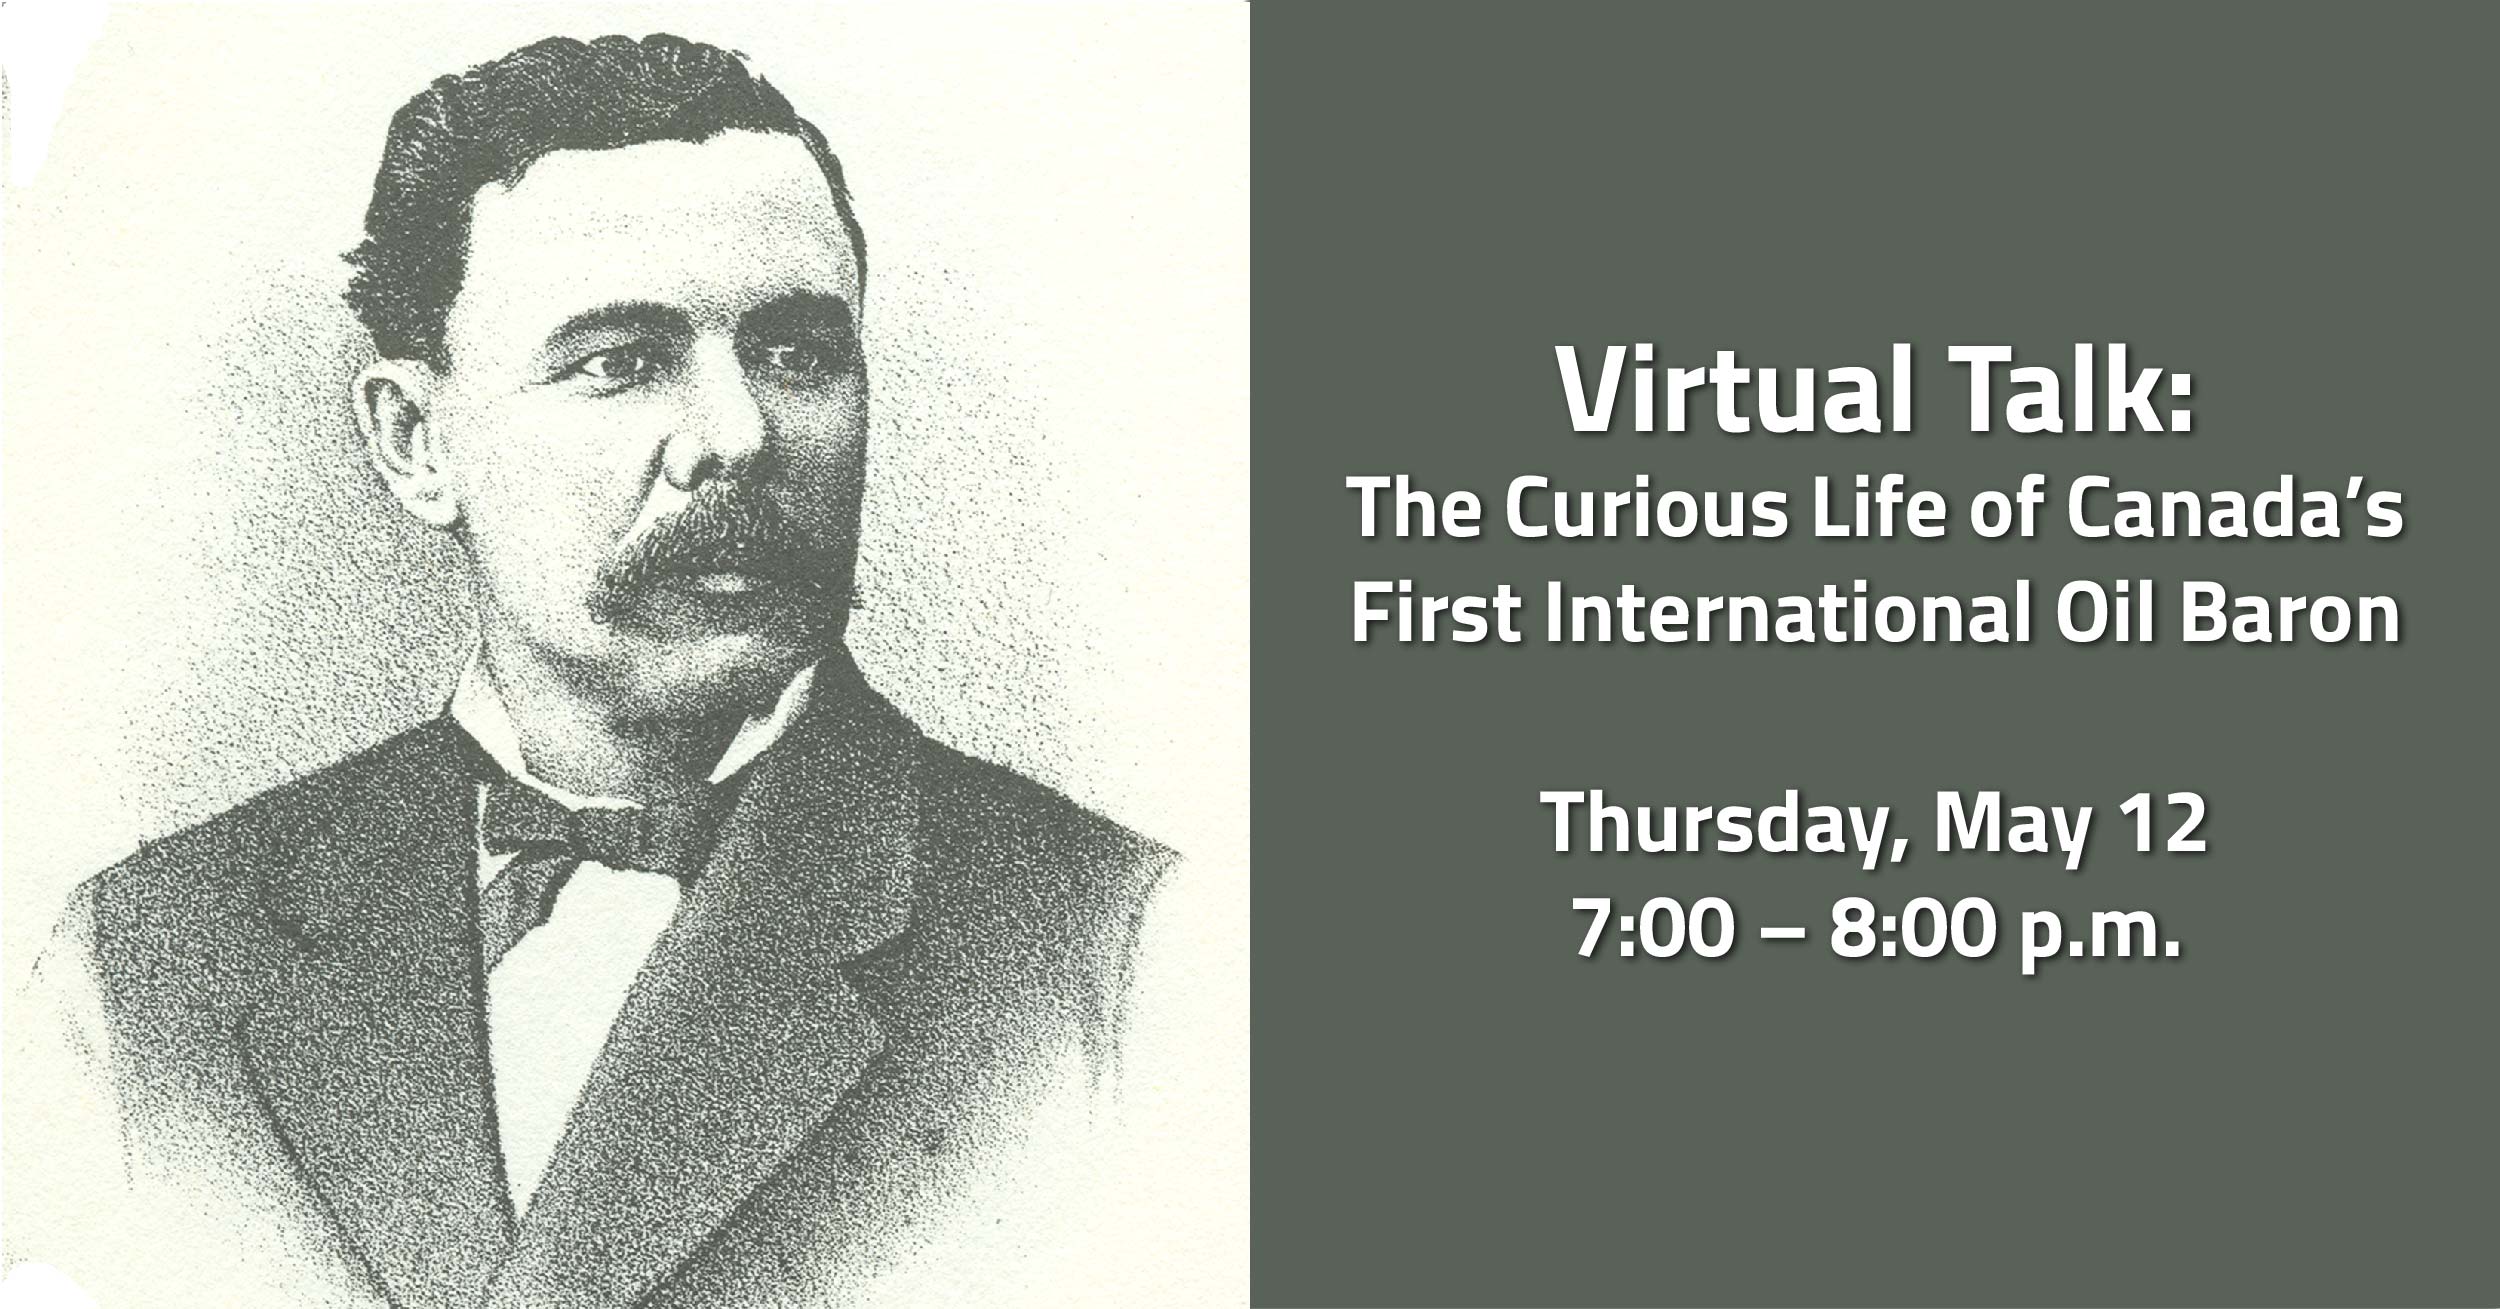 Graphic with text, "Virtual Talk: The Curious Life of Canada’s First International Oil Baron, Thursday, May 12, 7:00 - 8:00 p.m."